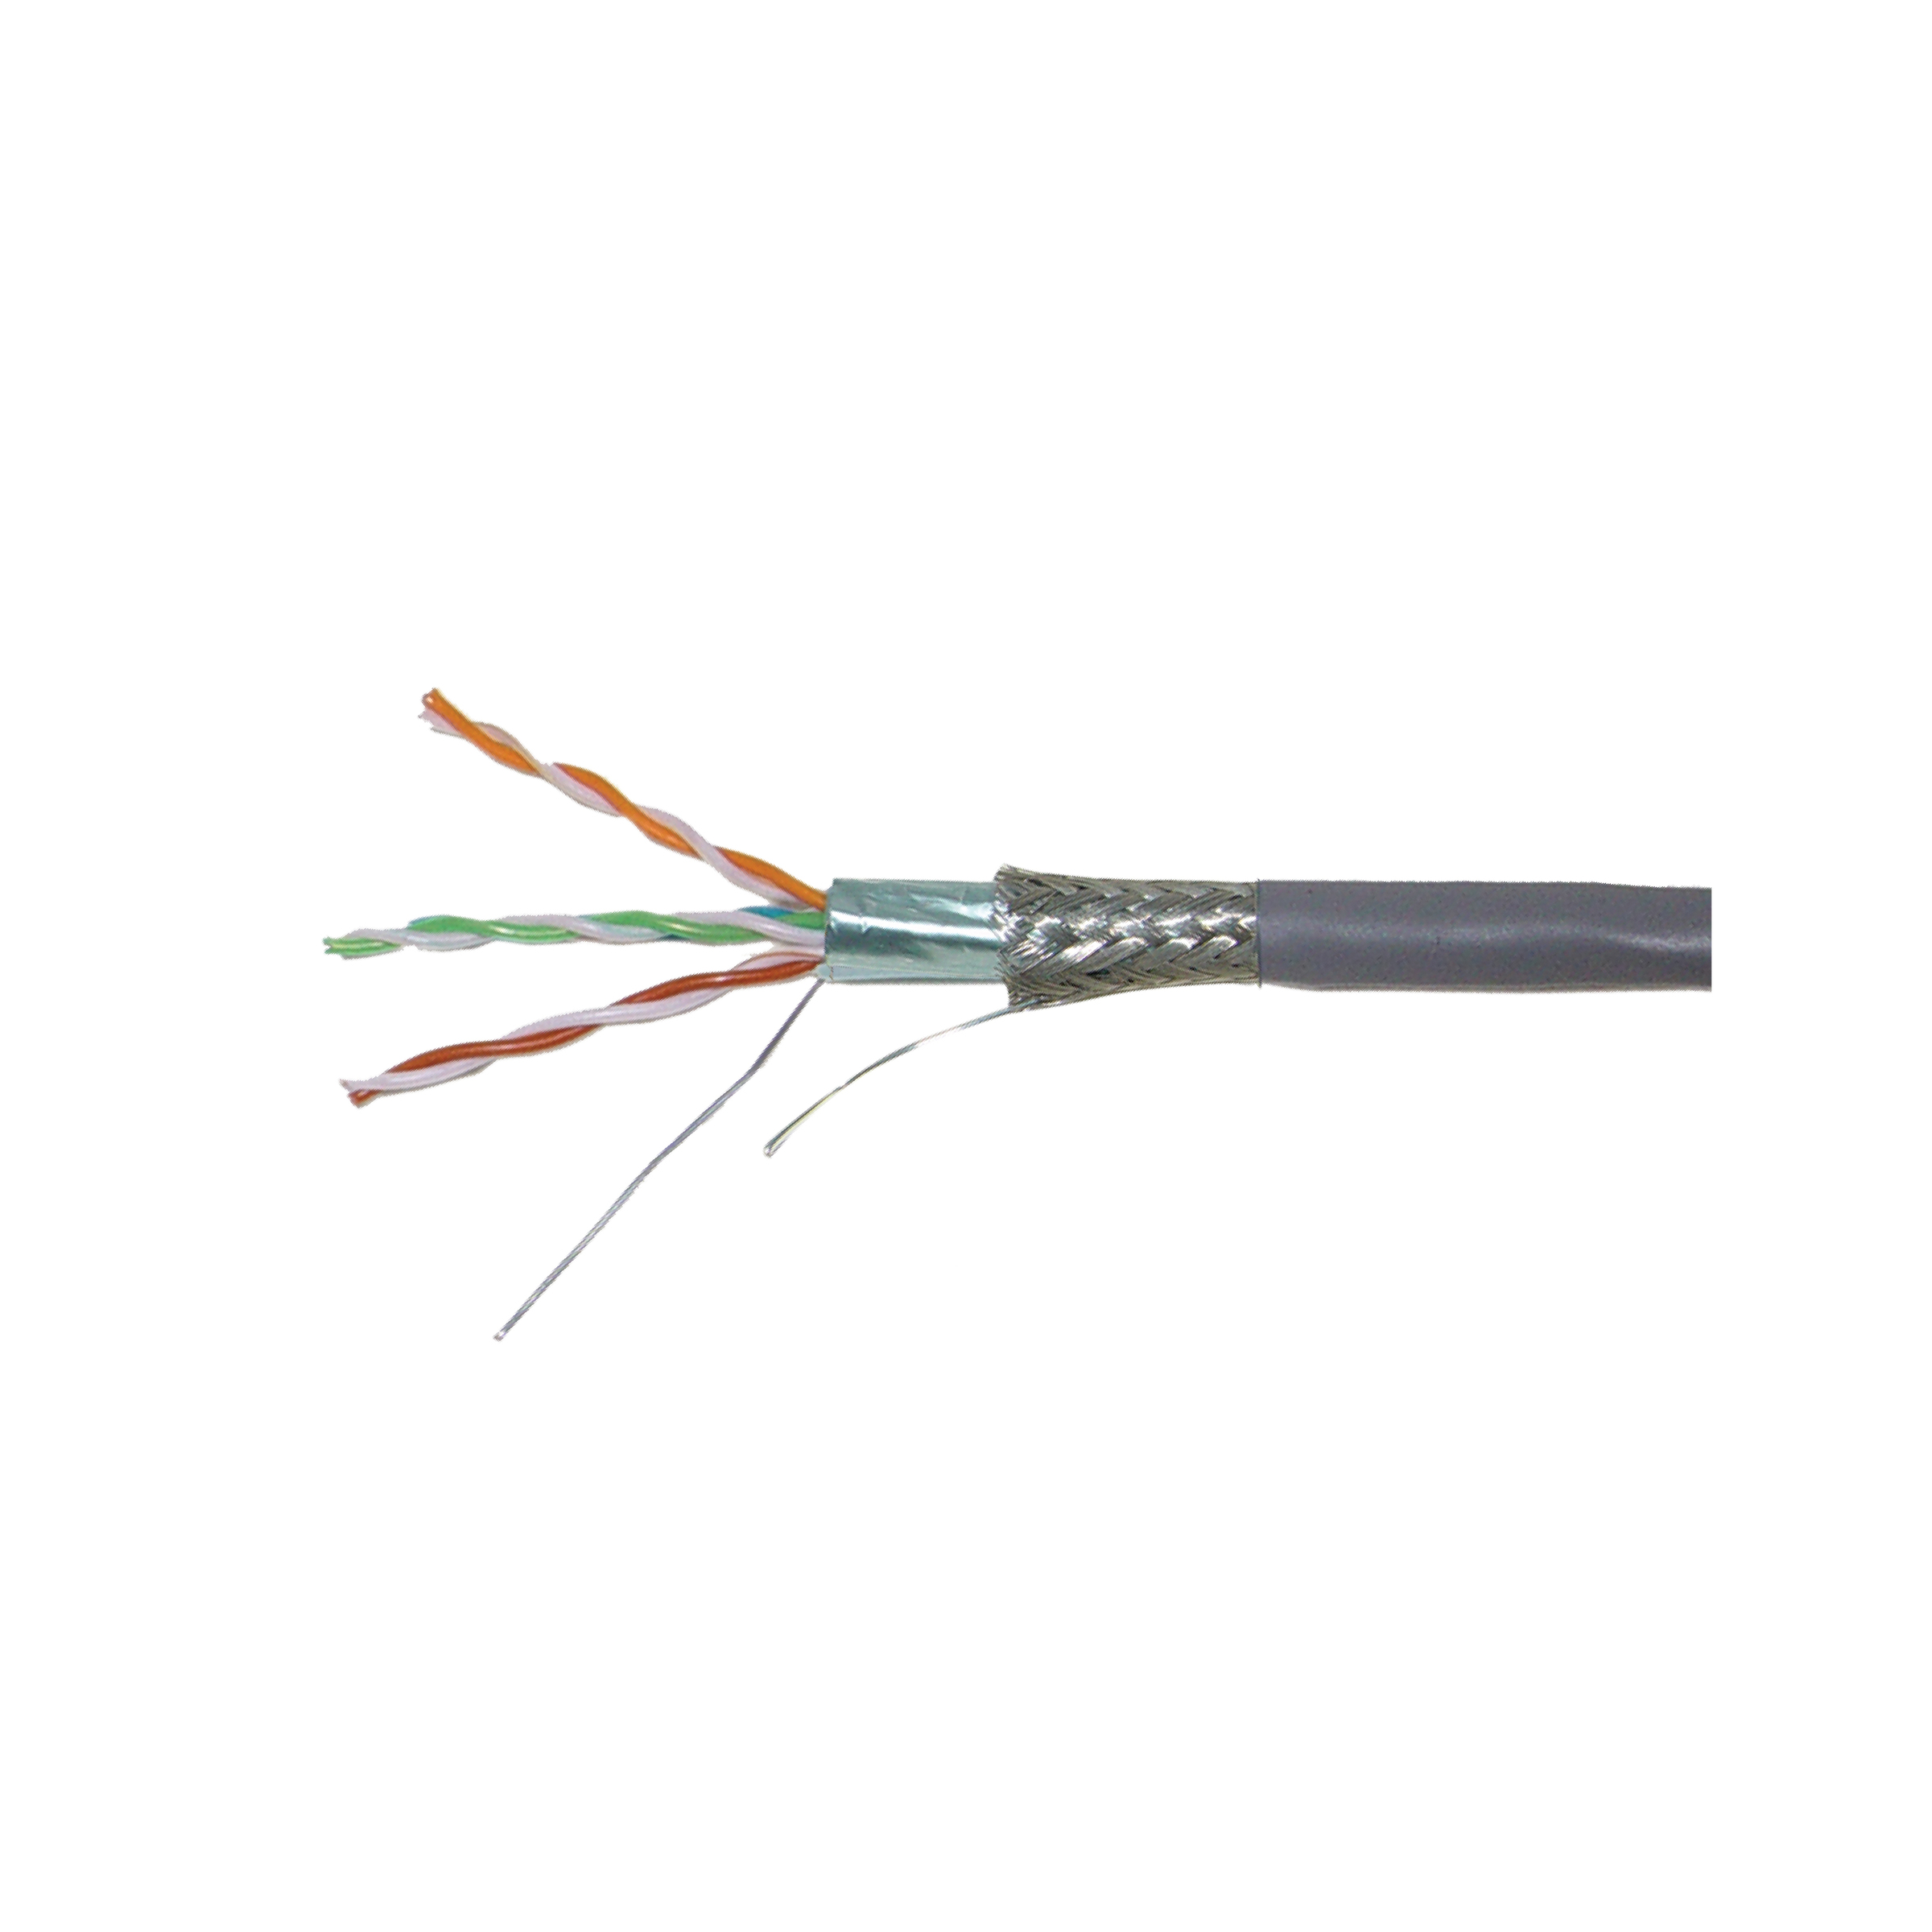 120 Ohm DDF Cable Shielded_4Pair.jpg